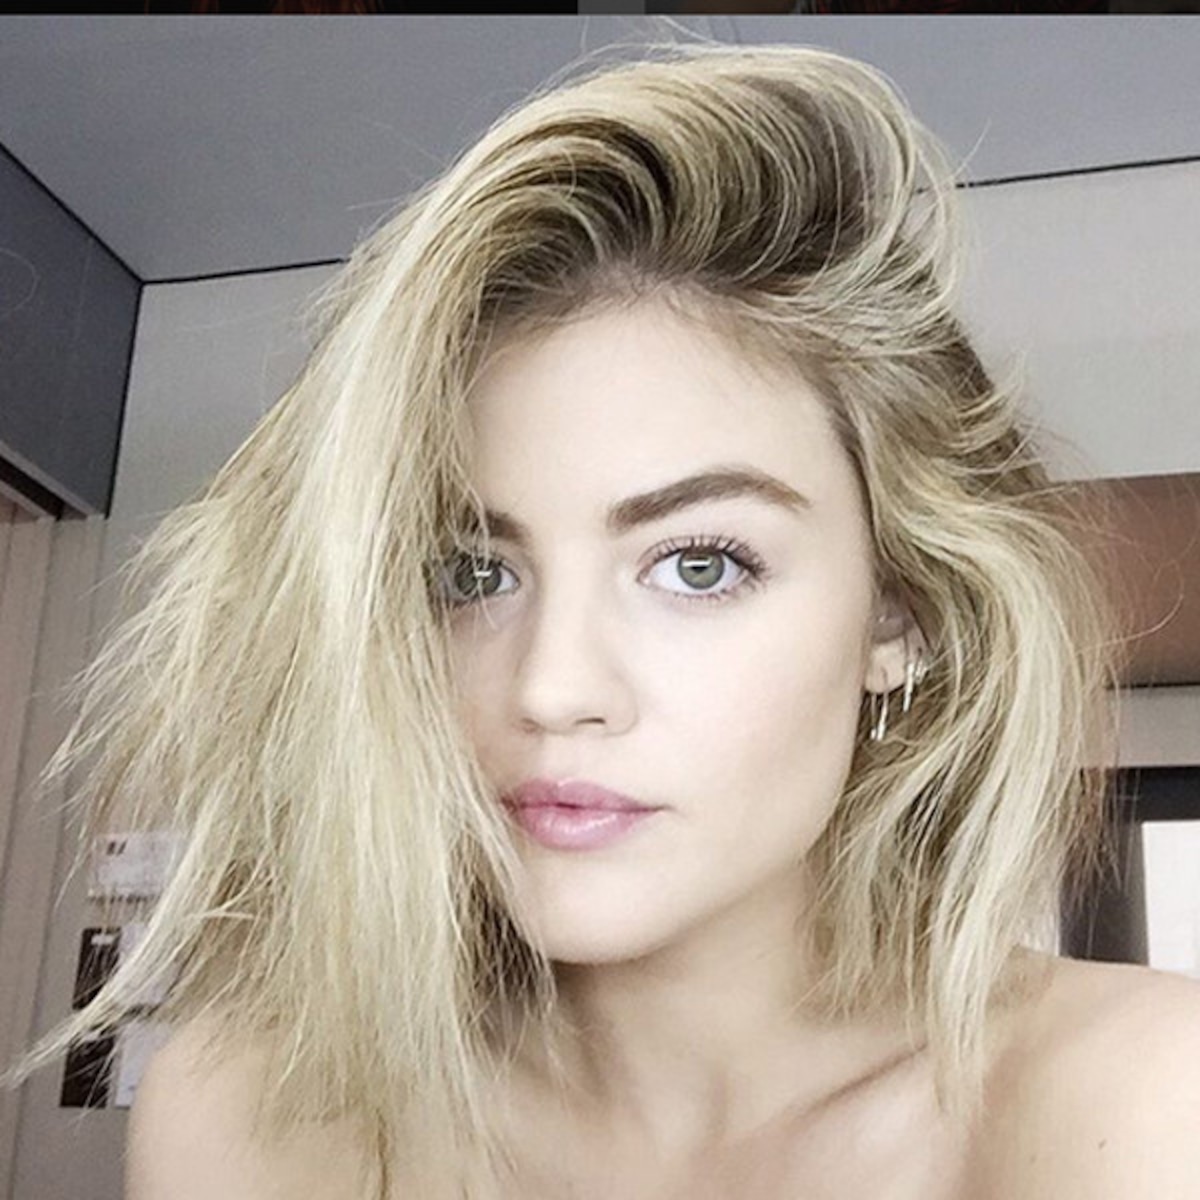 Pics leaked lucy hale 